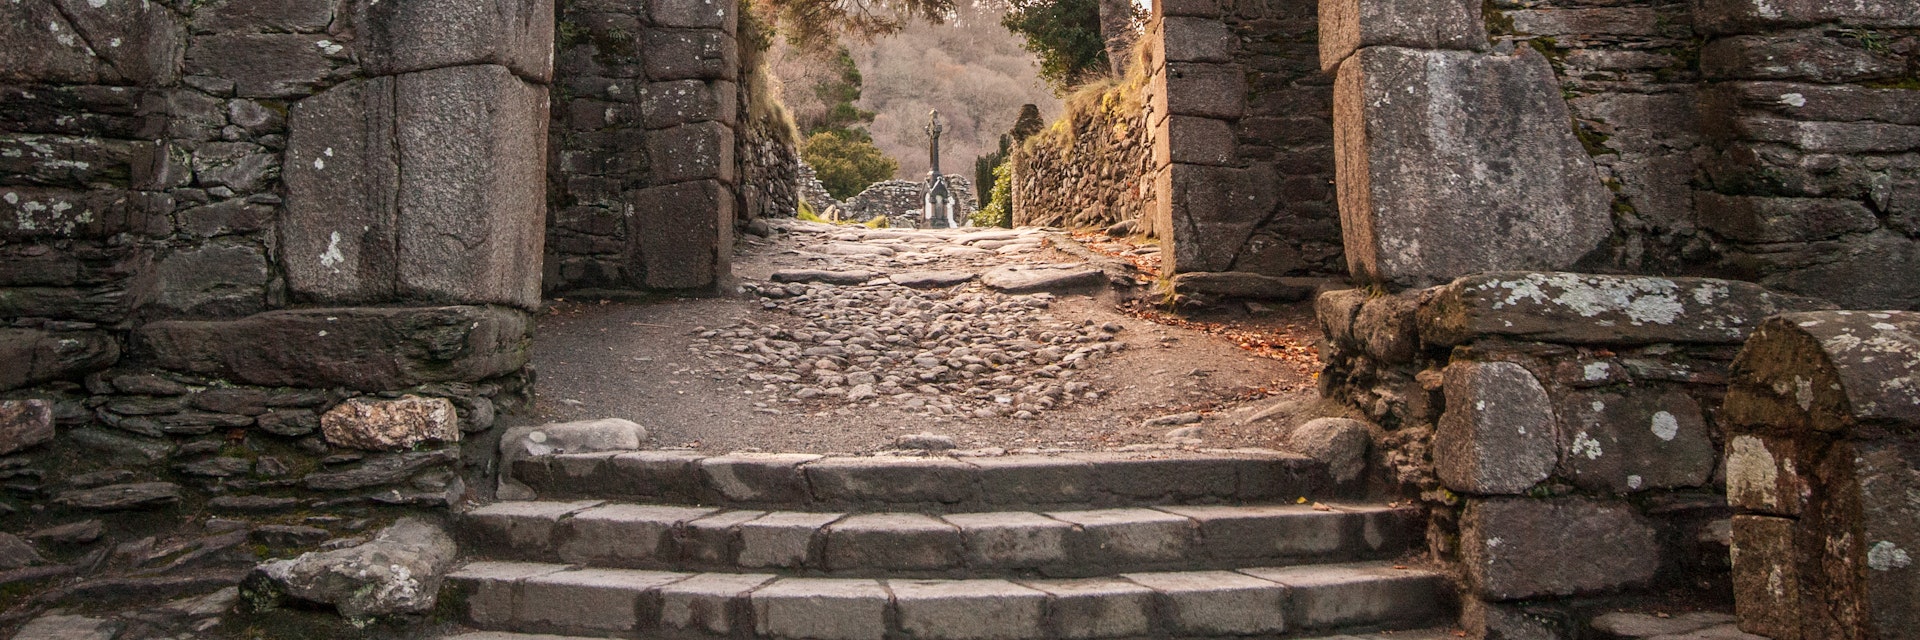 Stone arches and walls with stairs leading to Celtic cross.